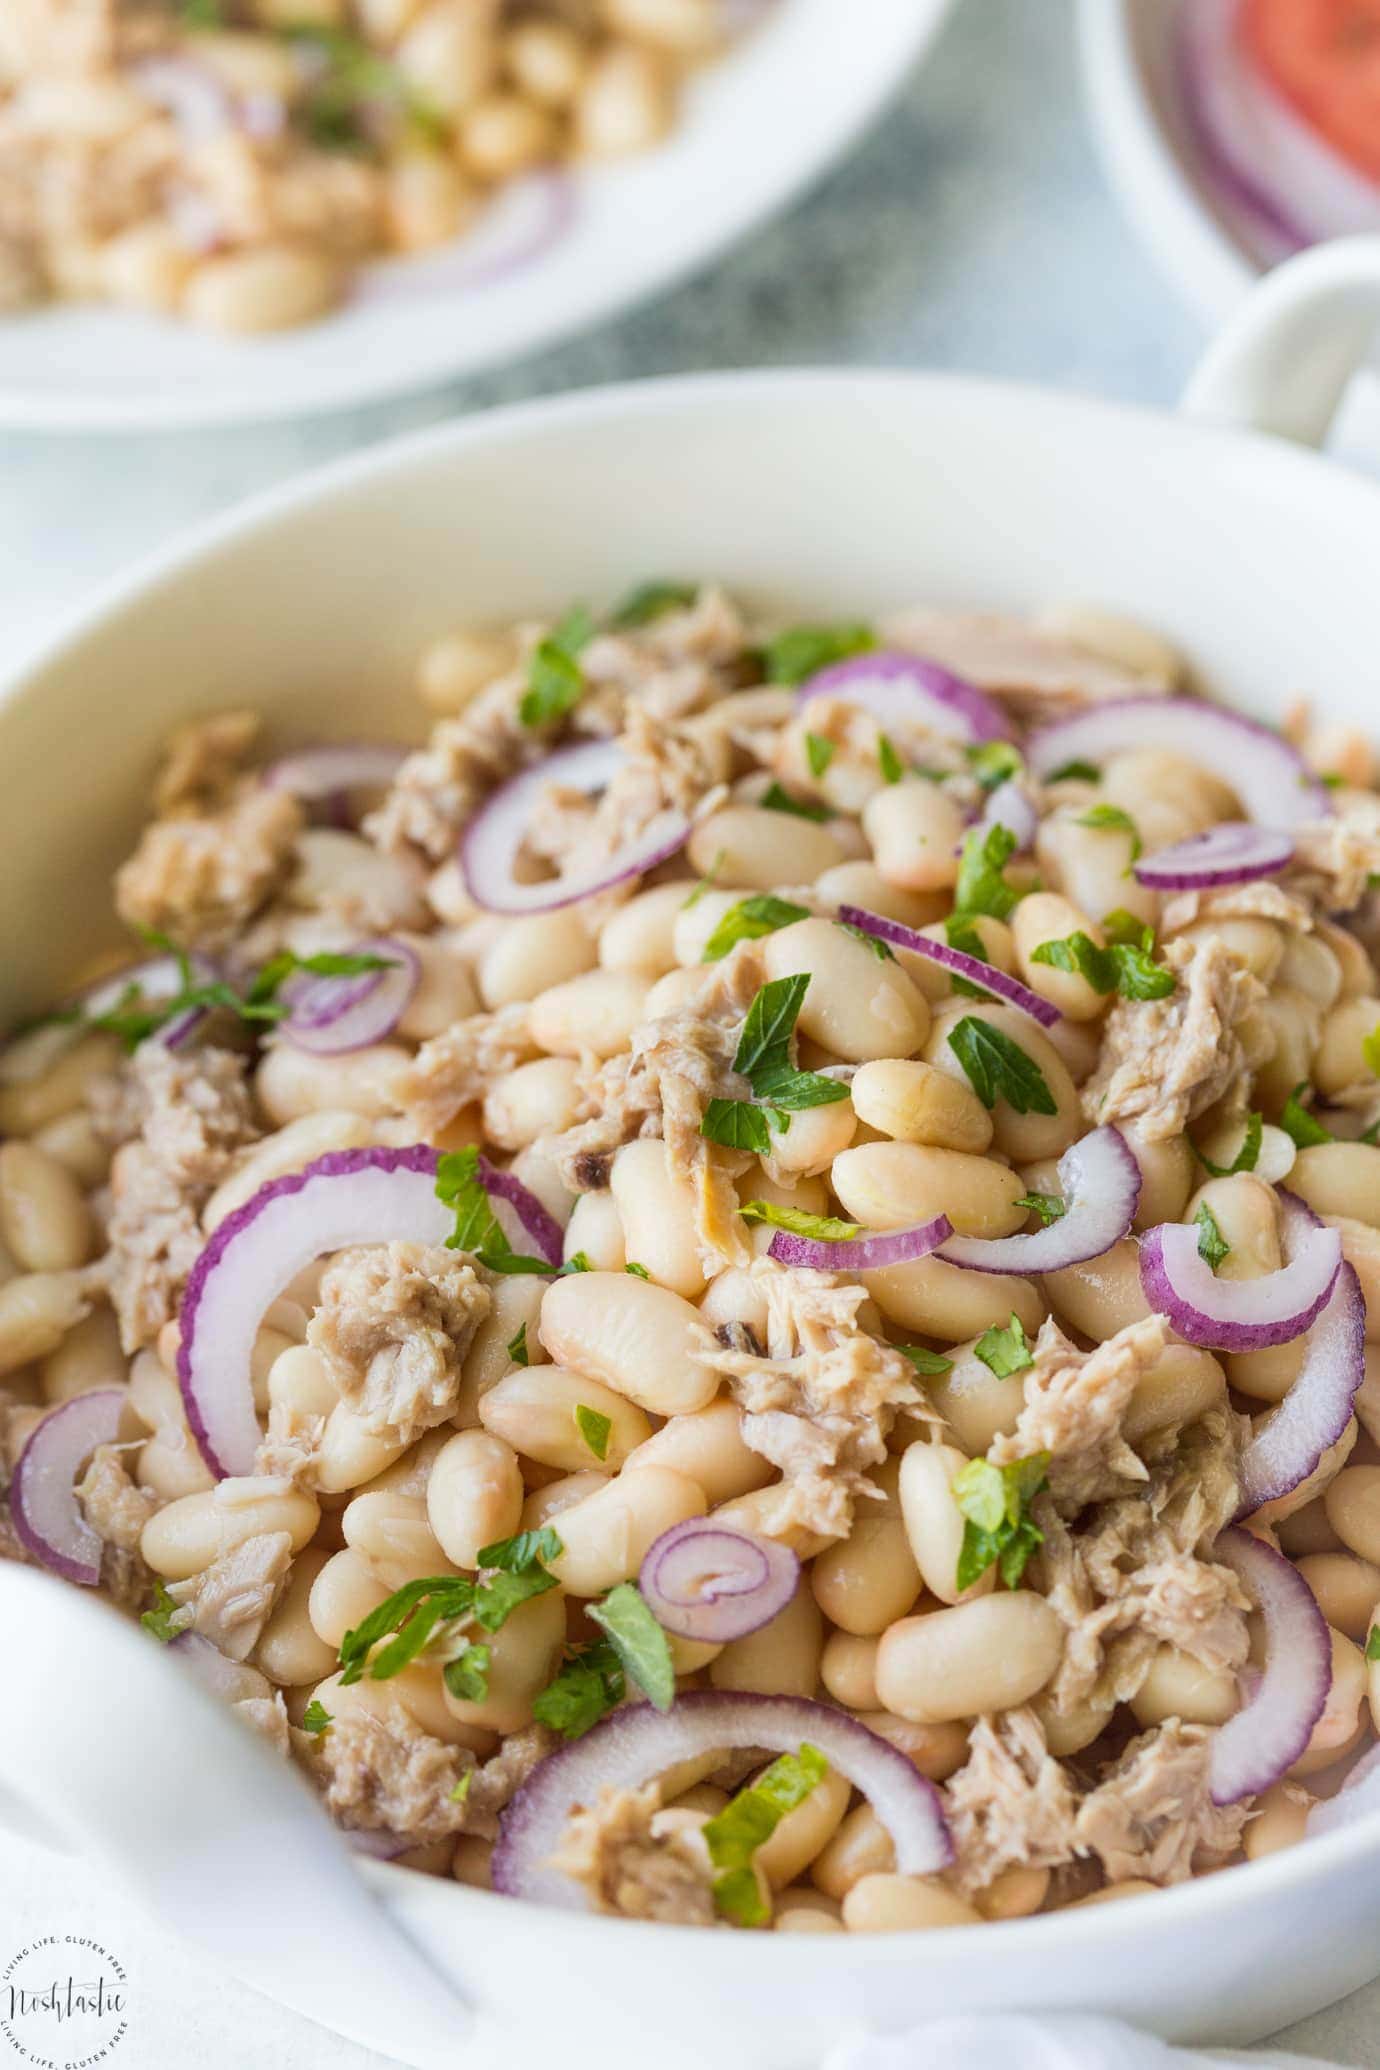 You'll love my Tuna White Bean Salad with Red Wine vinegar dressing, and no mayo! It's packed full of protein and contains, tuna, white beans and fresh parsley. A really healthy, gluten free, low calorie lunch or dinner option, this salad is ready to eat in less than 5 Minutes!